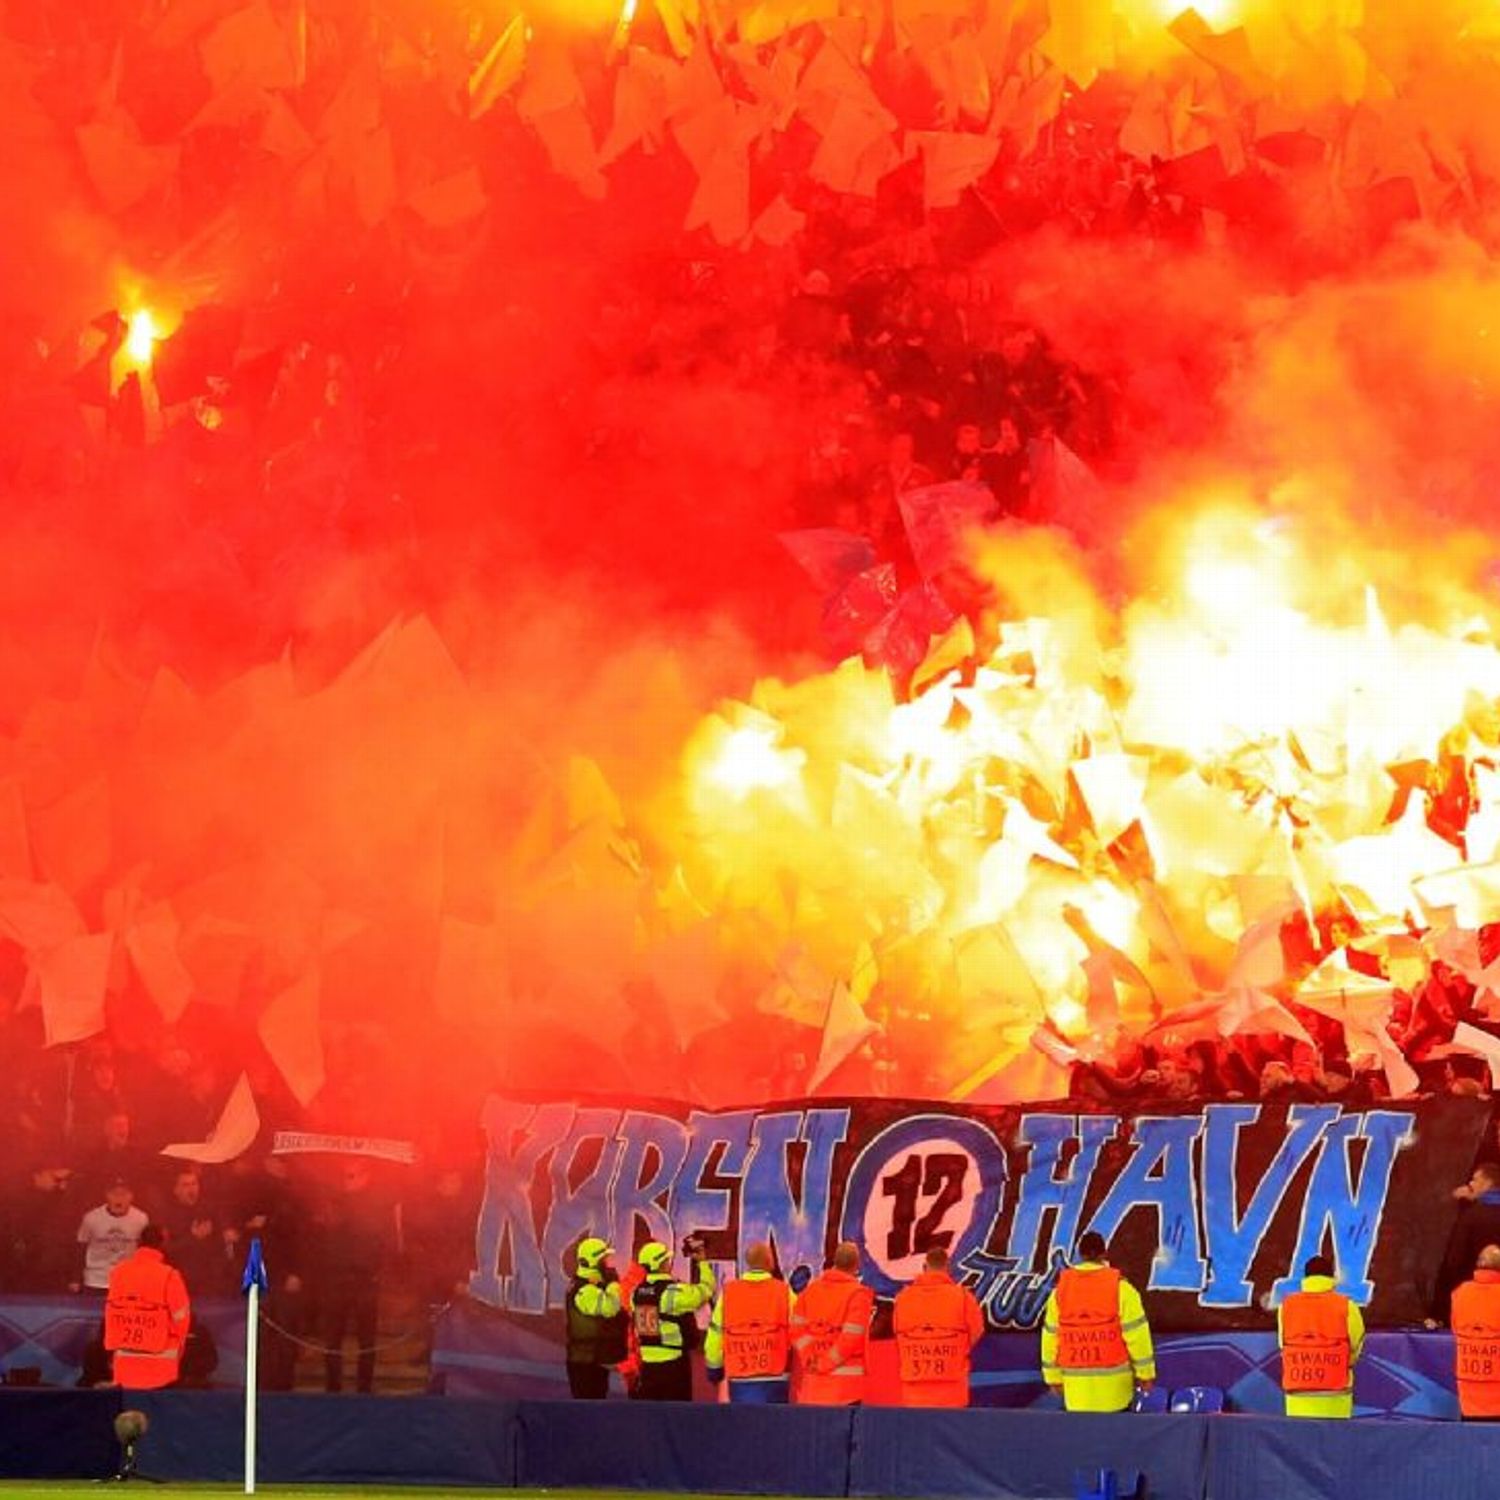 UEFA charges Copenhagen over fireworks in Champions League game at Leicester City